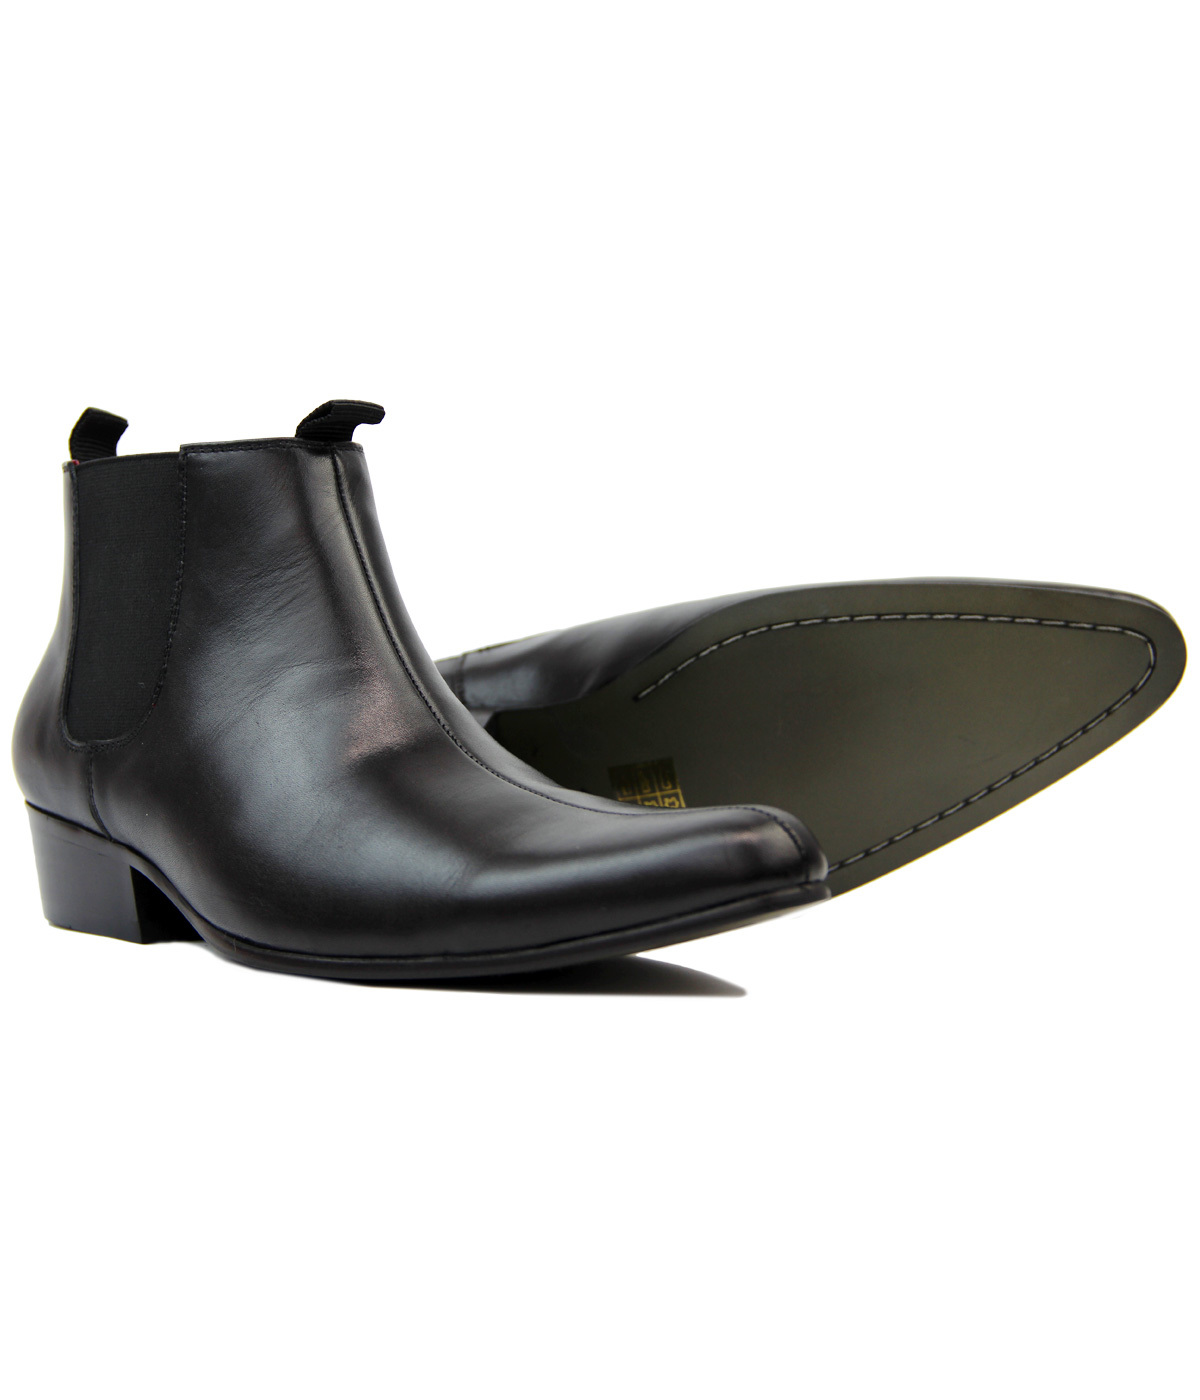 Madcap England Men's 'Lightfoot' Cuban Heel Chelsea Boots in Black Leather